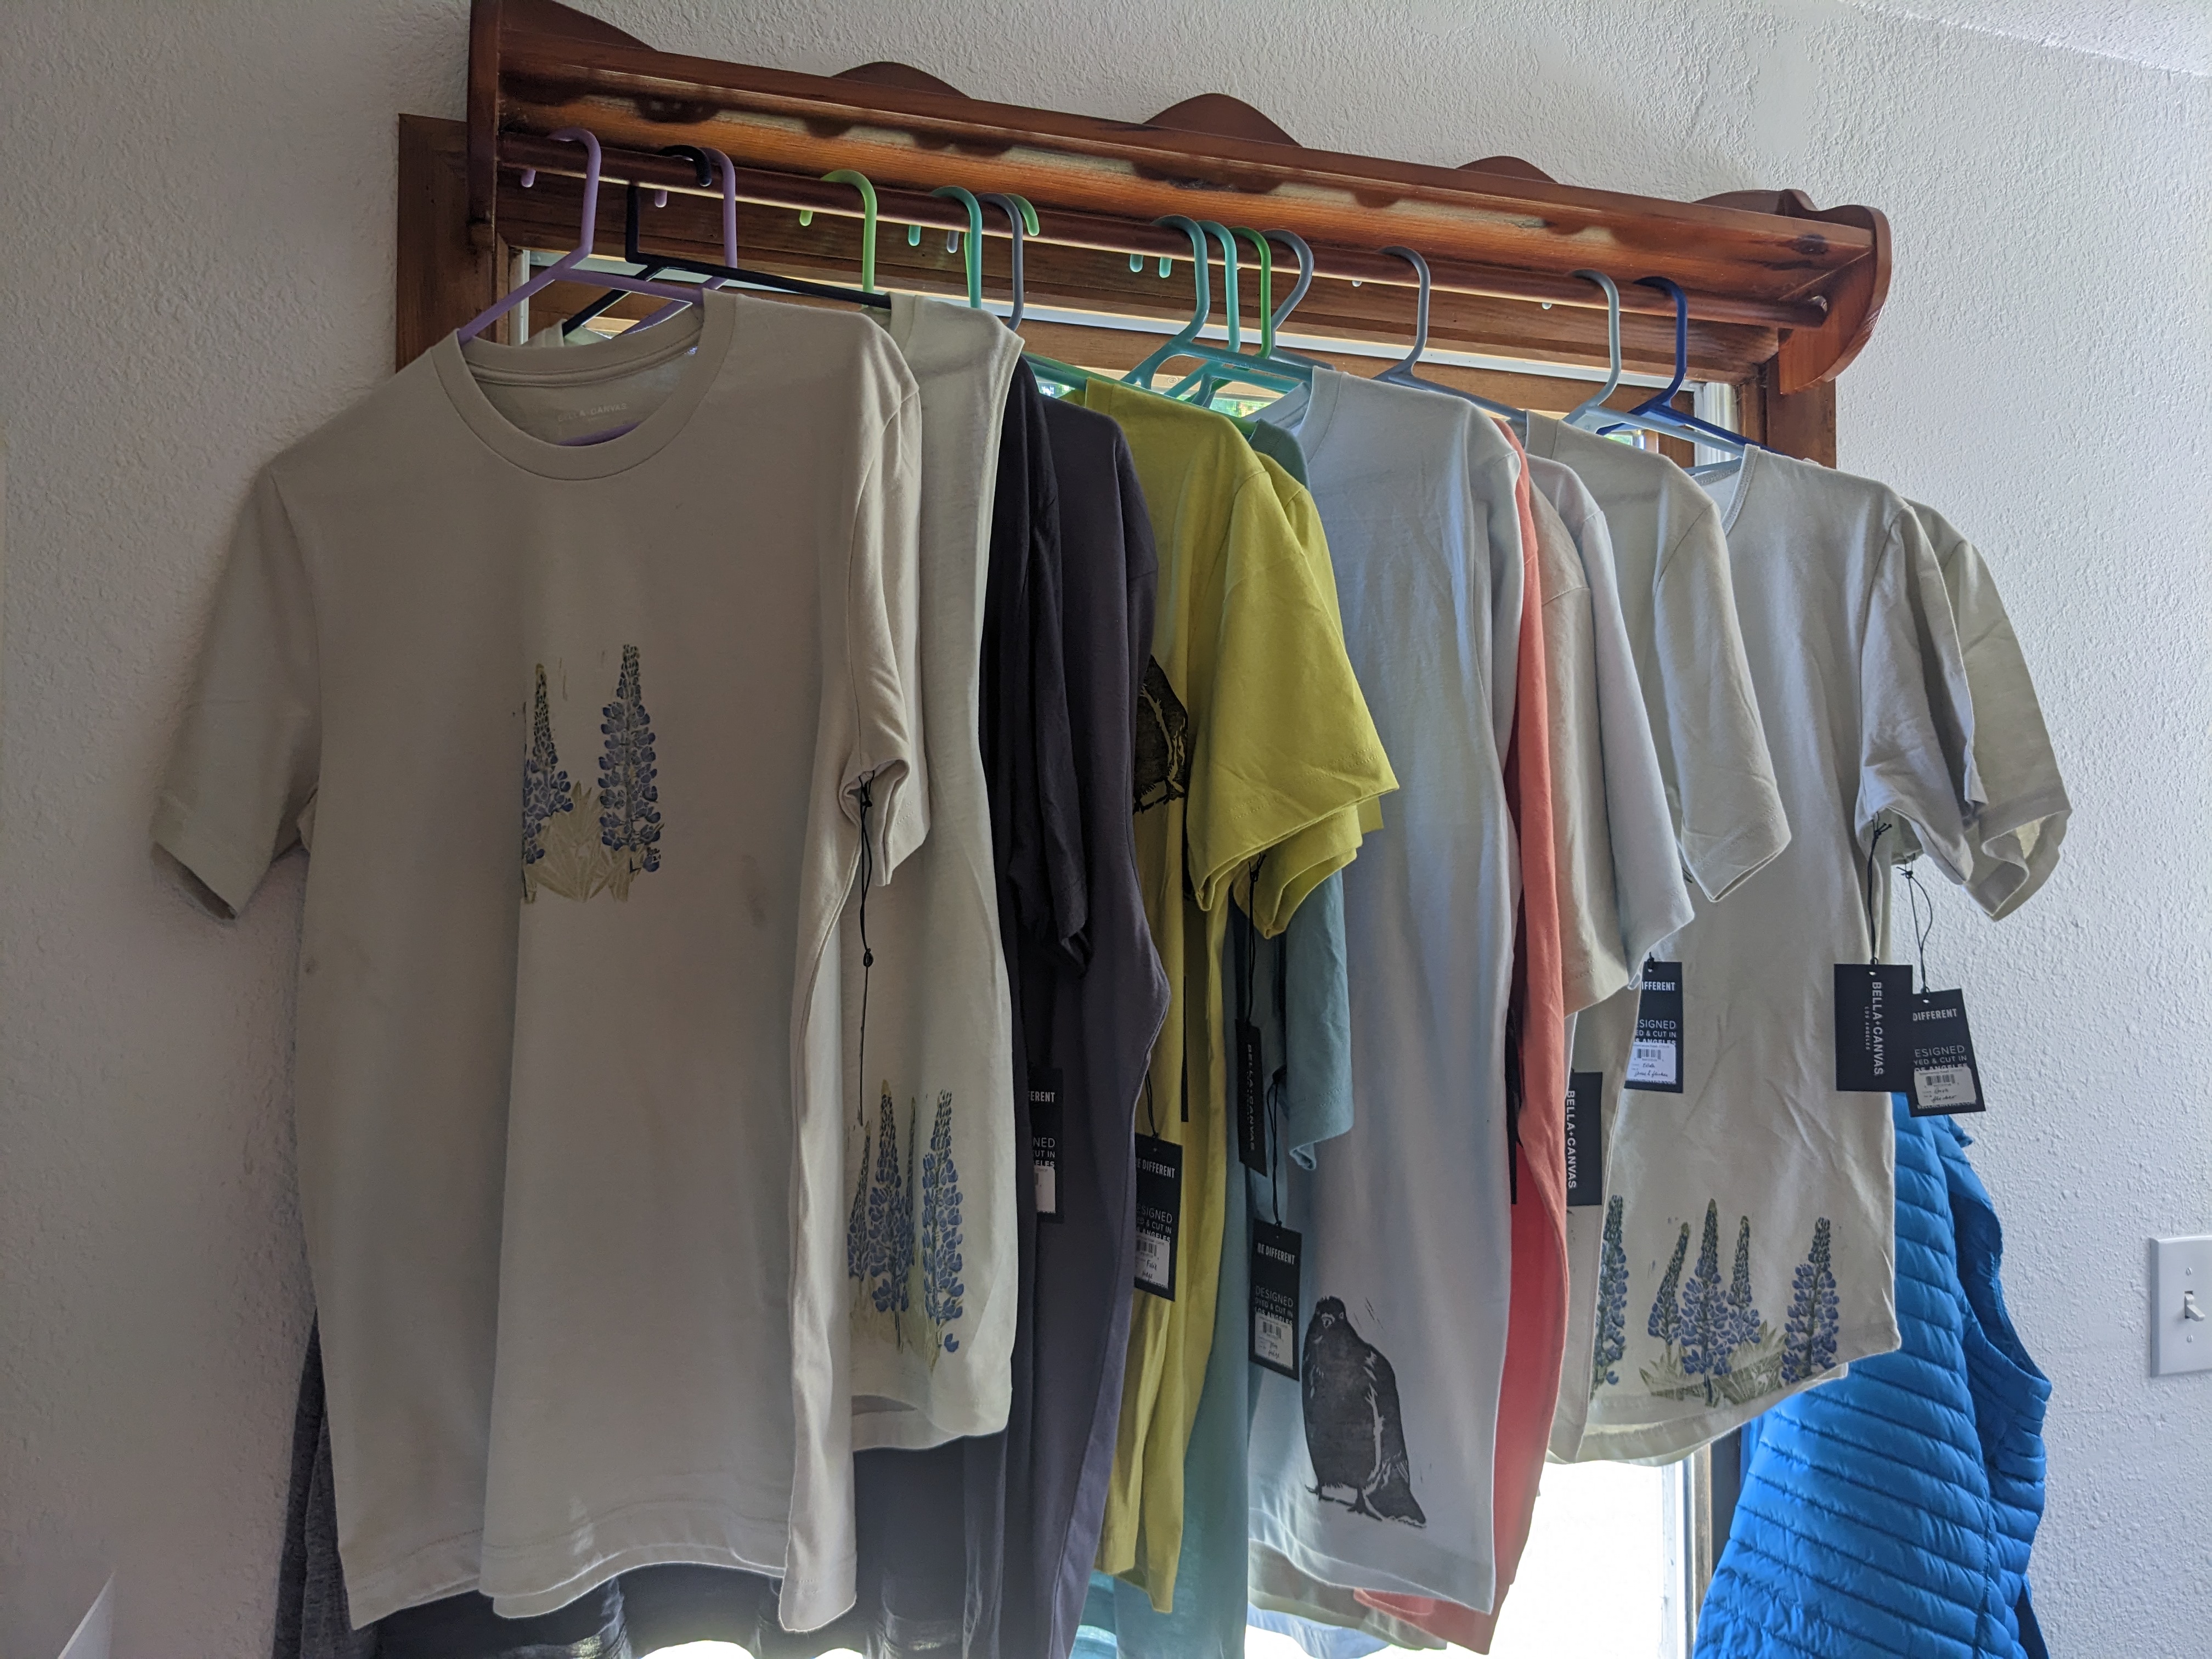 A row of shirts hanging in front of a window, with a variety of hand-printed designs.